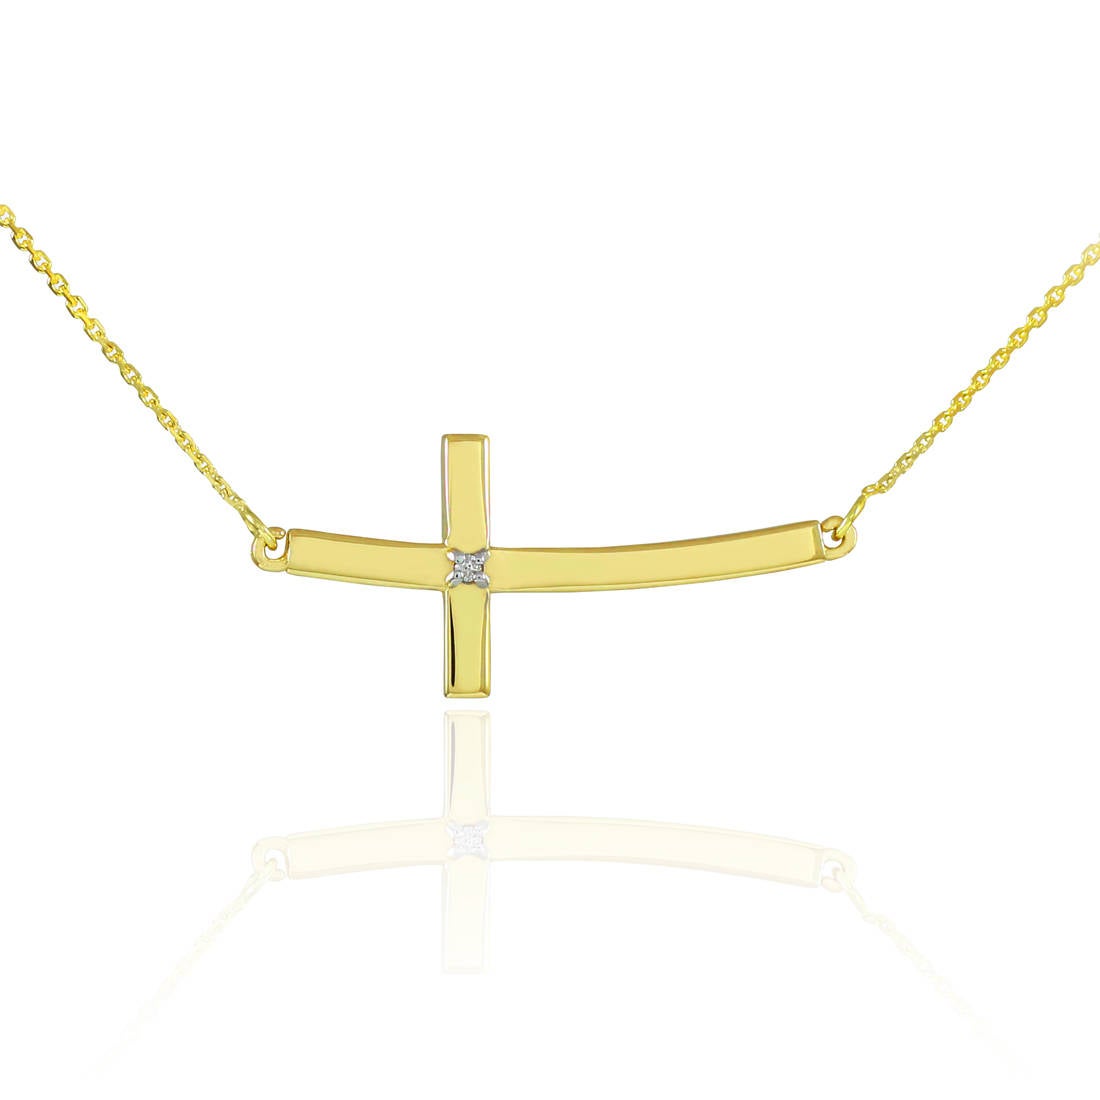 14K Solid Gold Sideways Diamond Curved Cross Necklace (yellow, white, rose gold) Karma Blingz